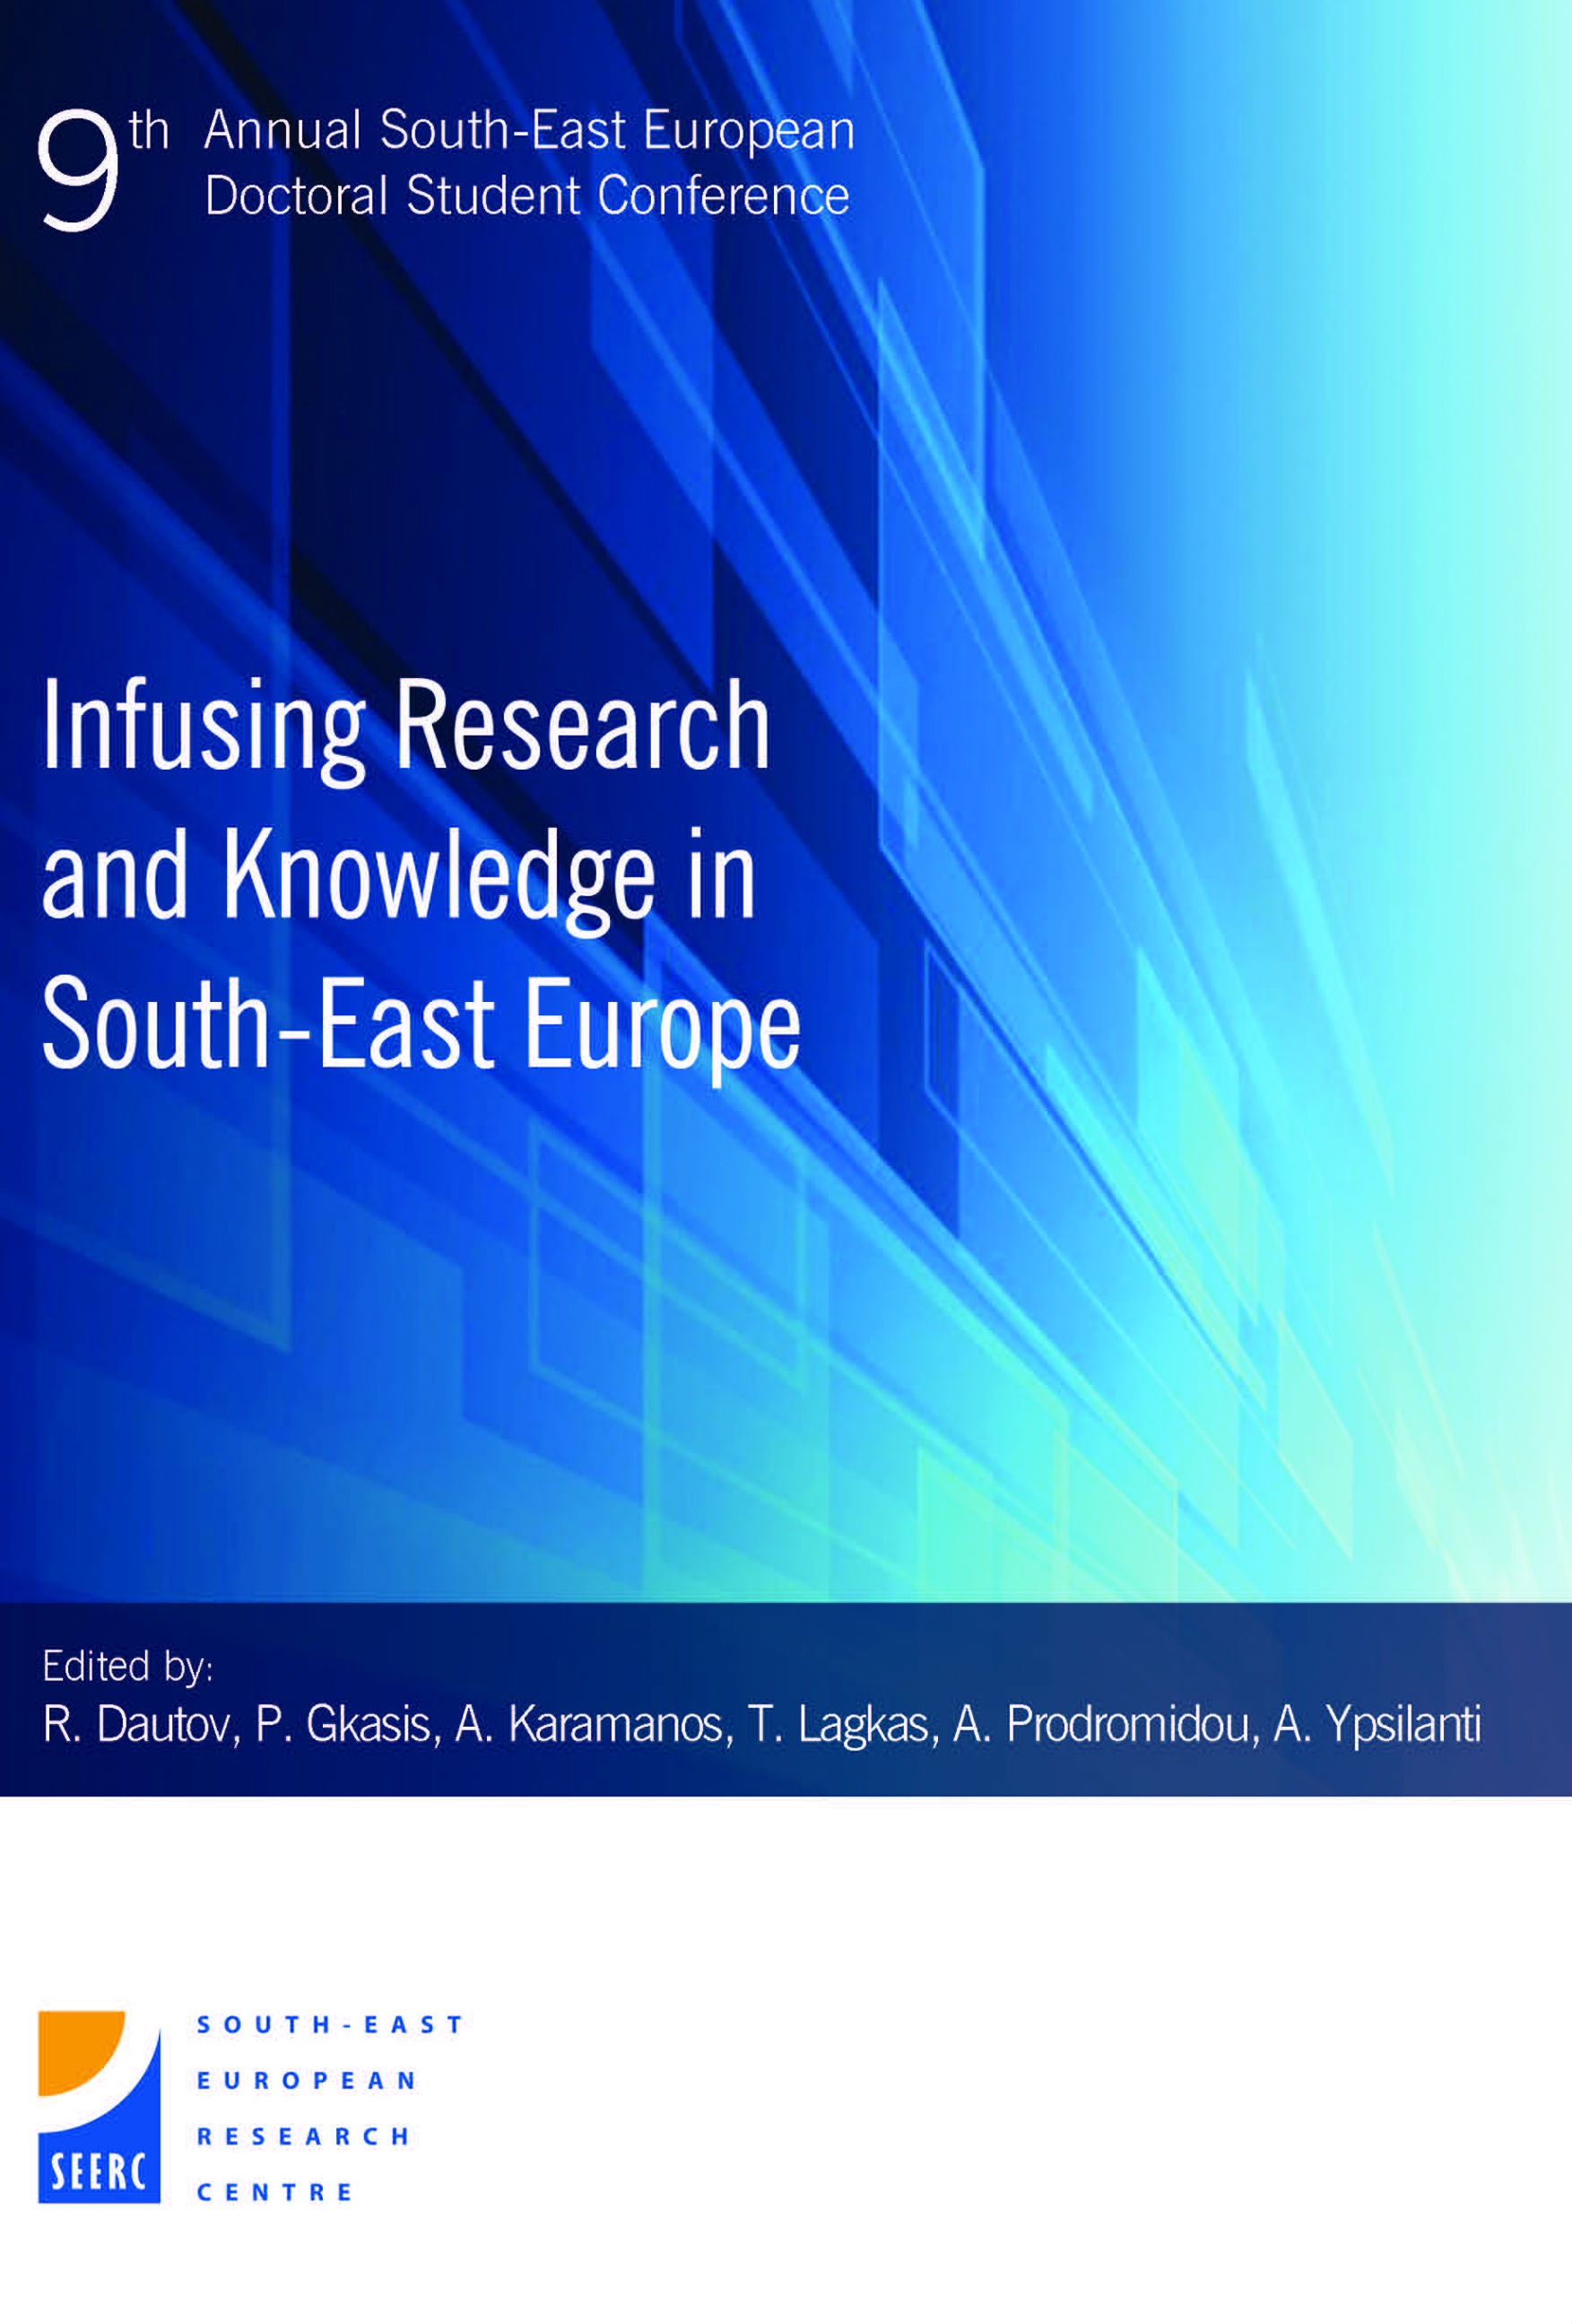 Proceedings of the 9th Annual South-East European Doctoral Student Conference: Infusing Research and Knowledge in South-East Europe